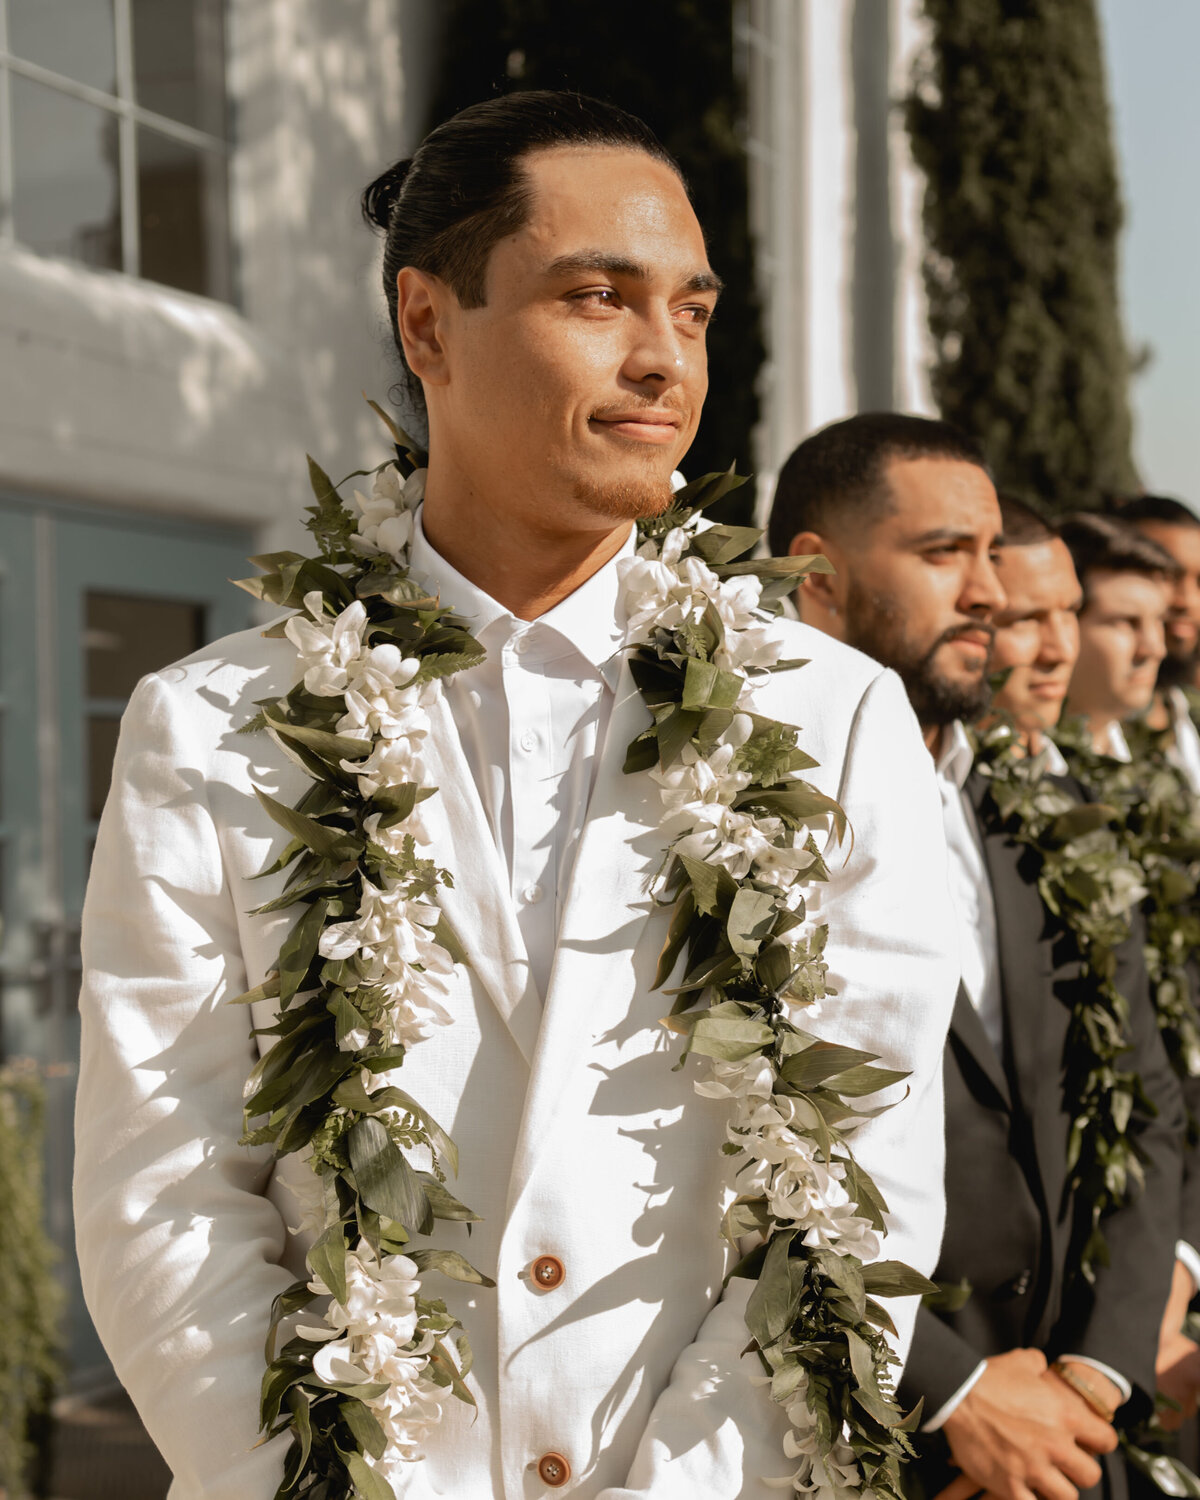 Jordan-and-kyle-southern-california-wedding-planner-the-pretty-palm-leaf-event-6